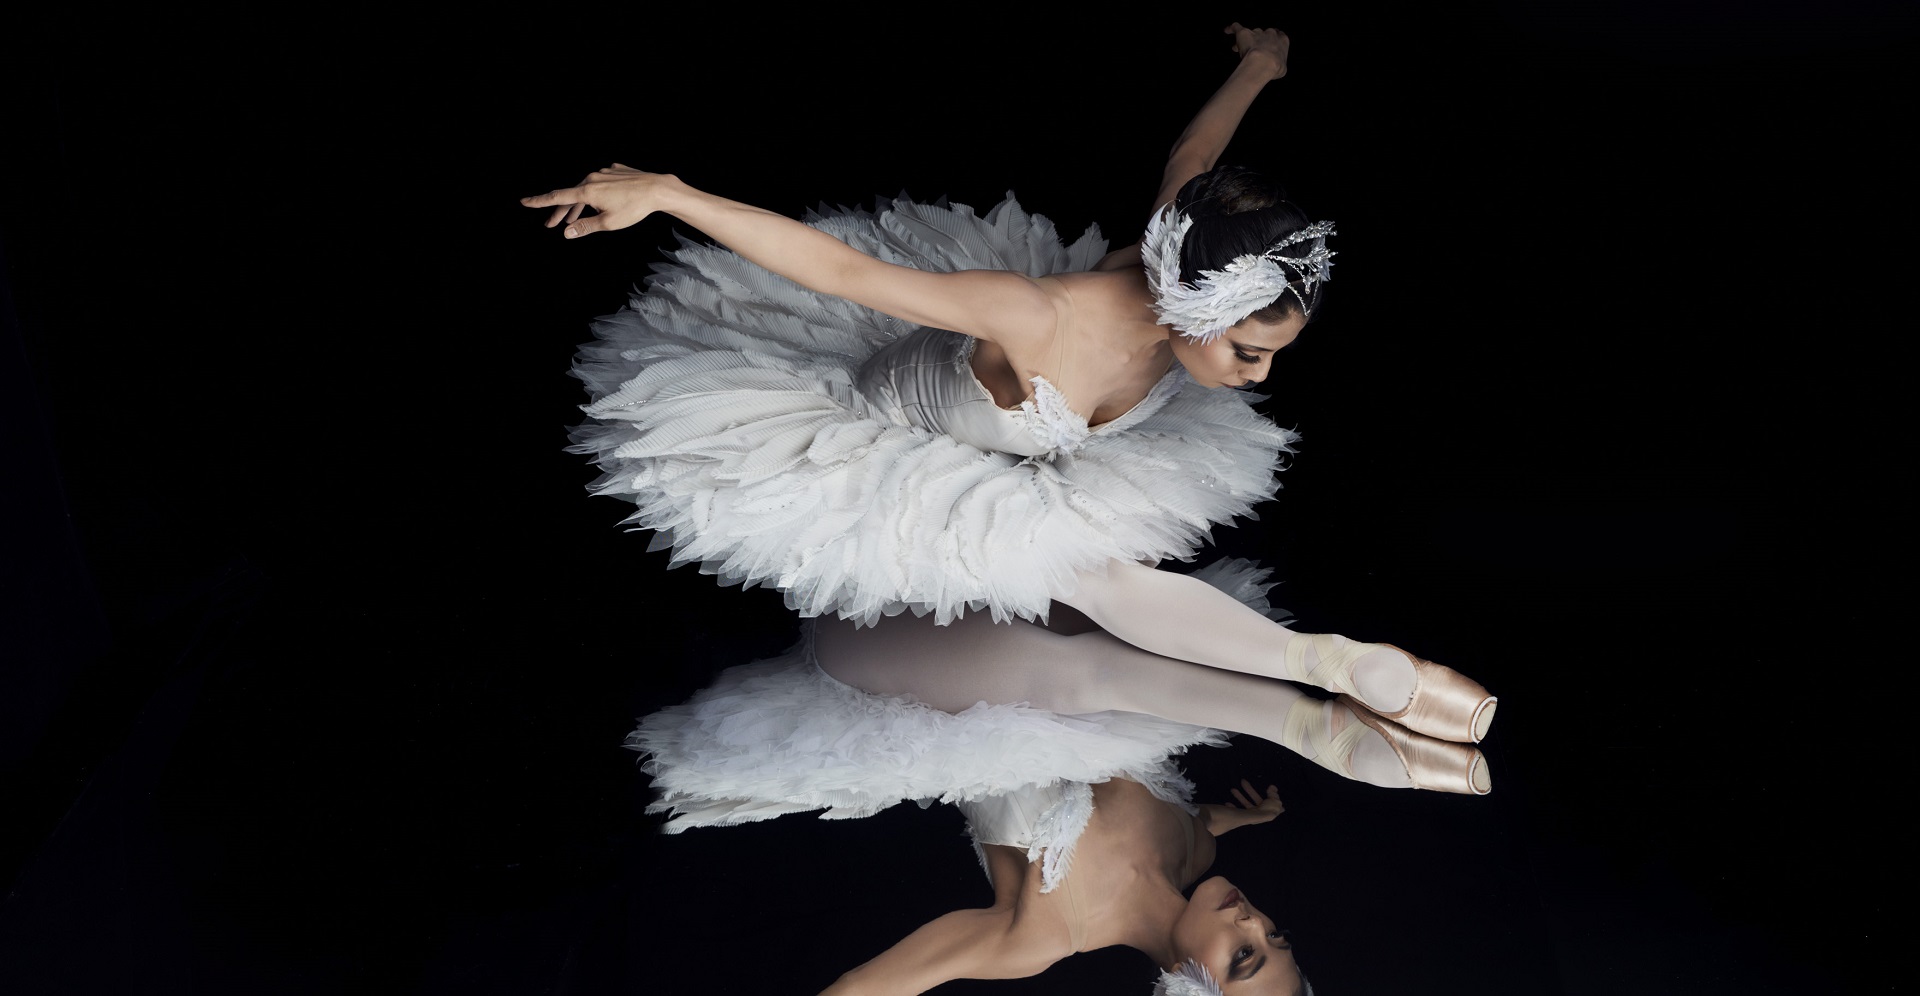 Link to event Cancelled 28.12.2021-28.2.2022: Swan Lake